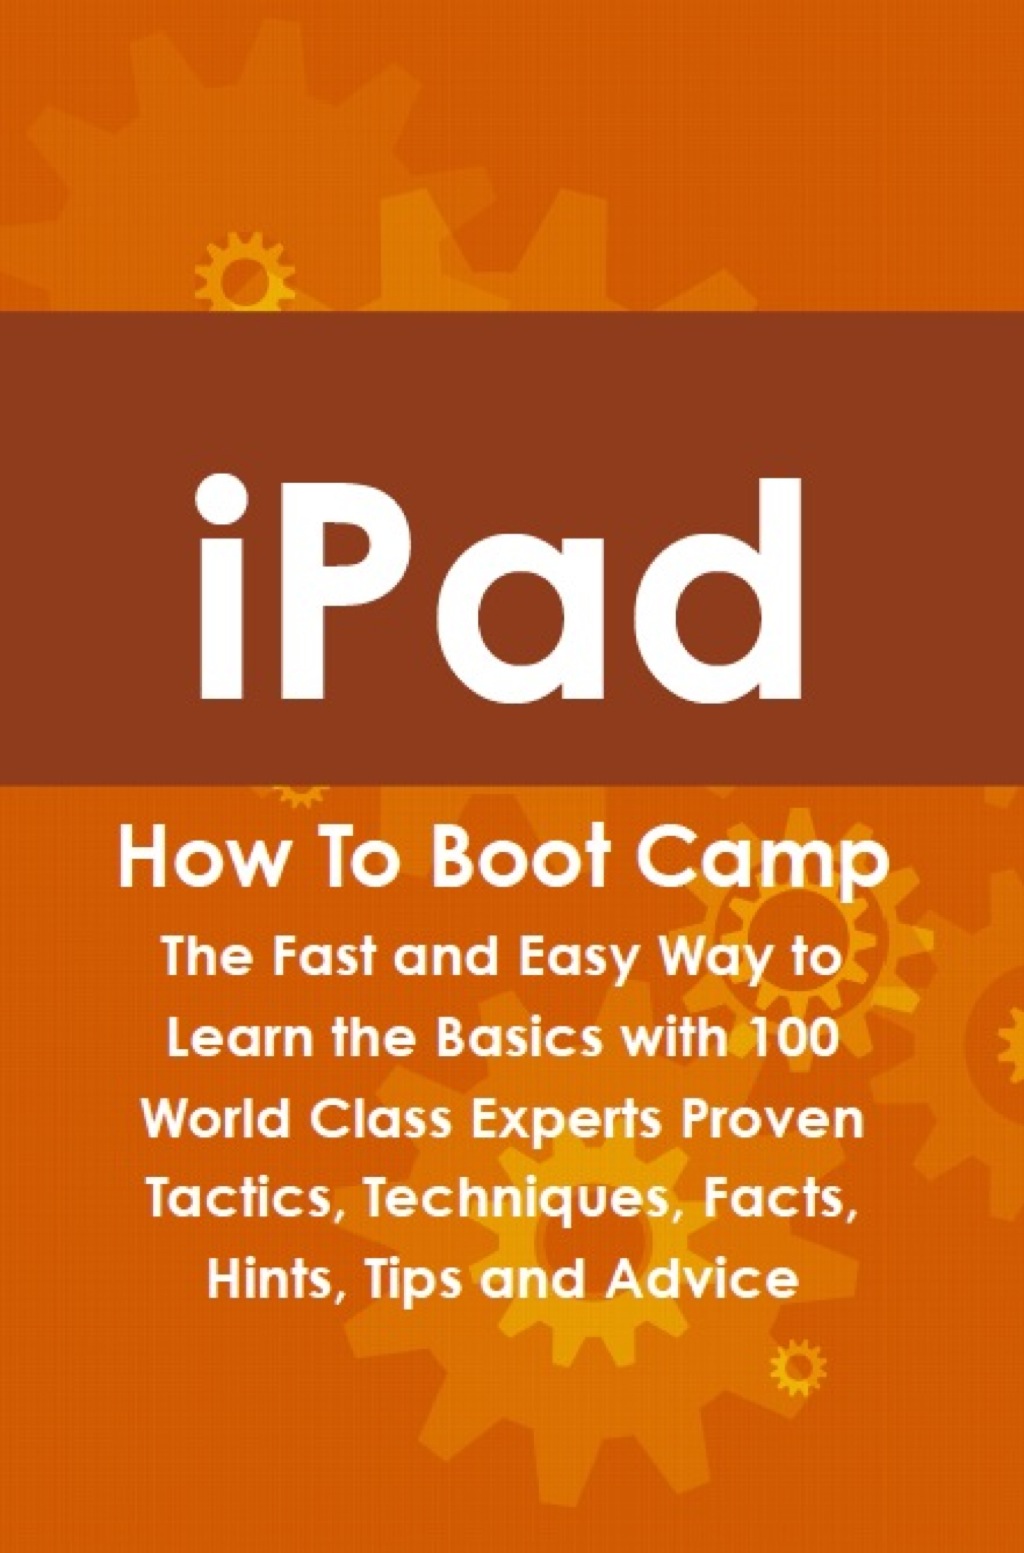 iPad How To Boot Camp: The Fast and Easy Way to Learn the Basics with 100 World Class Experts Proven Tactics  Techniques  (eBook) - Max Bondy,